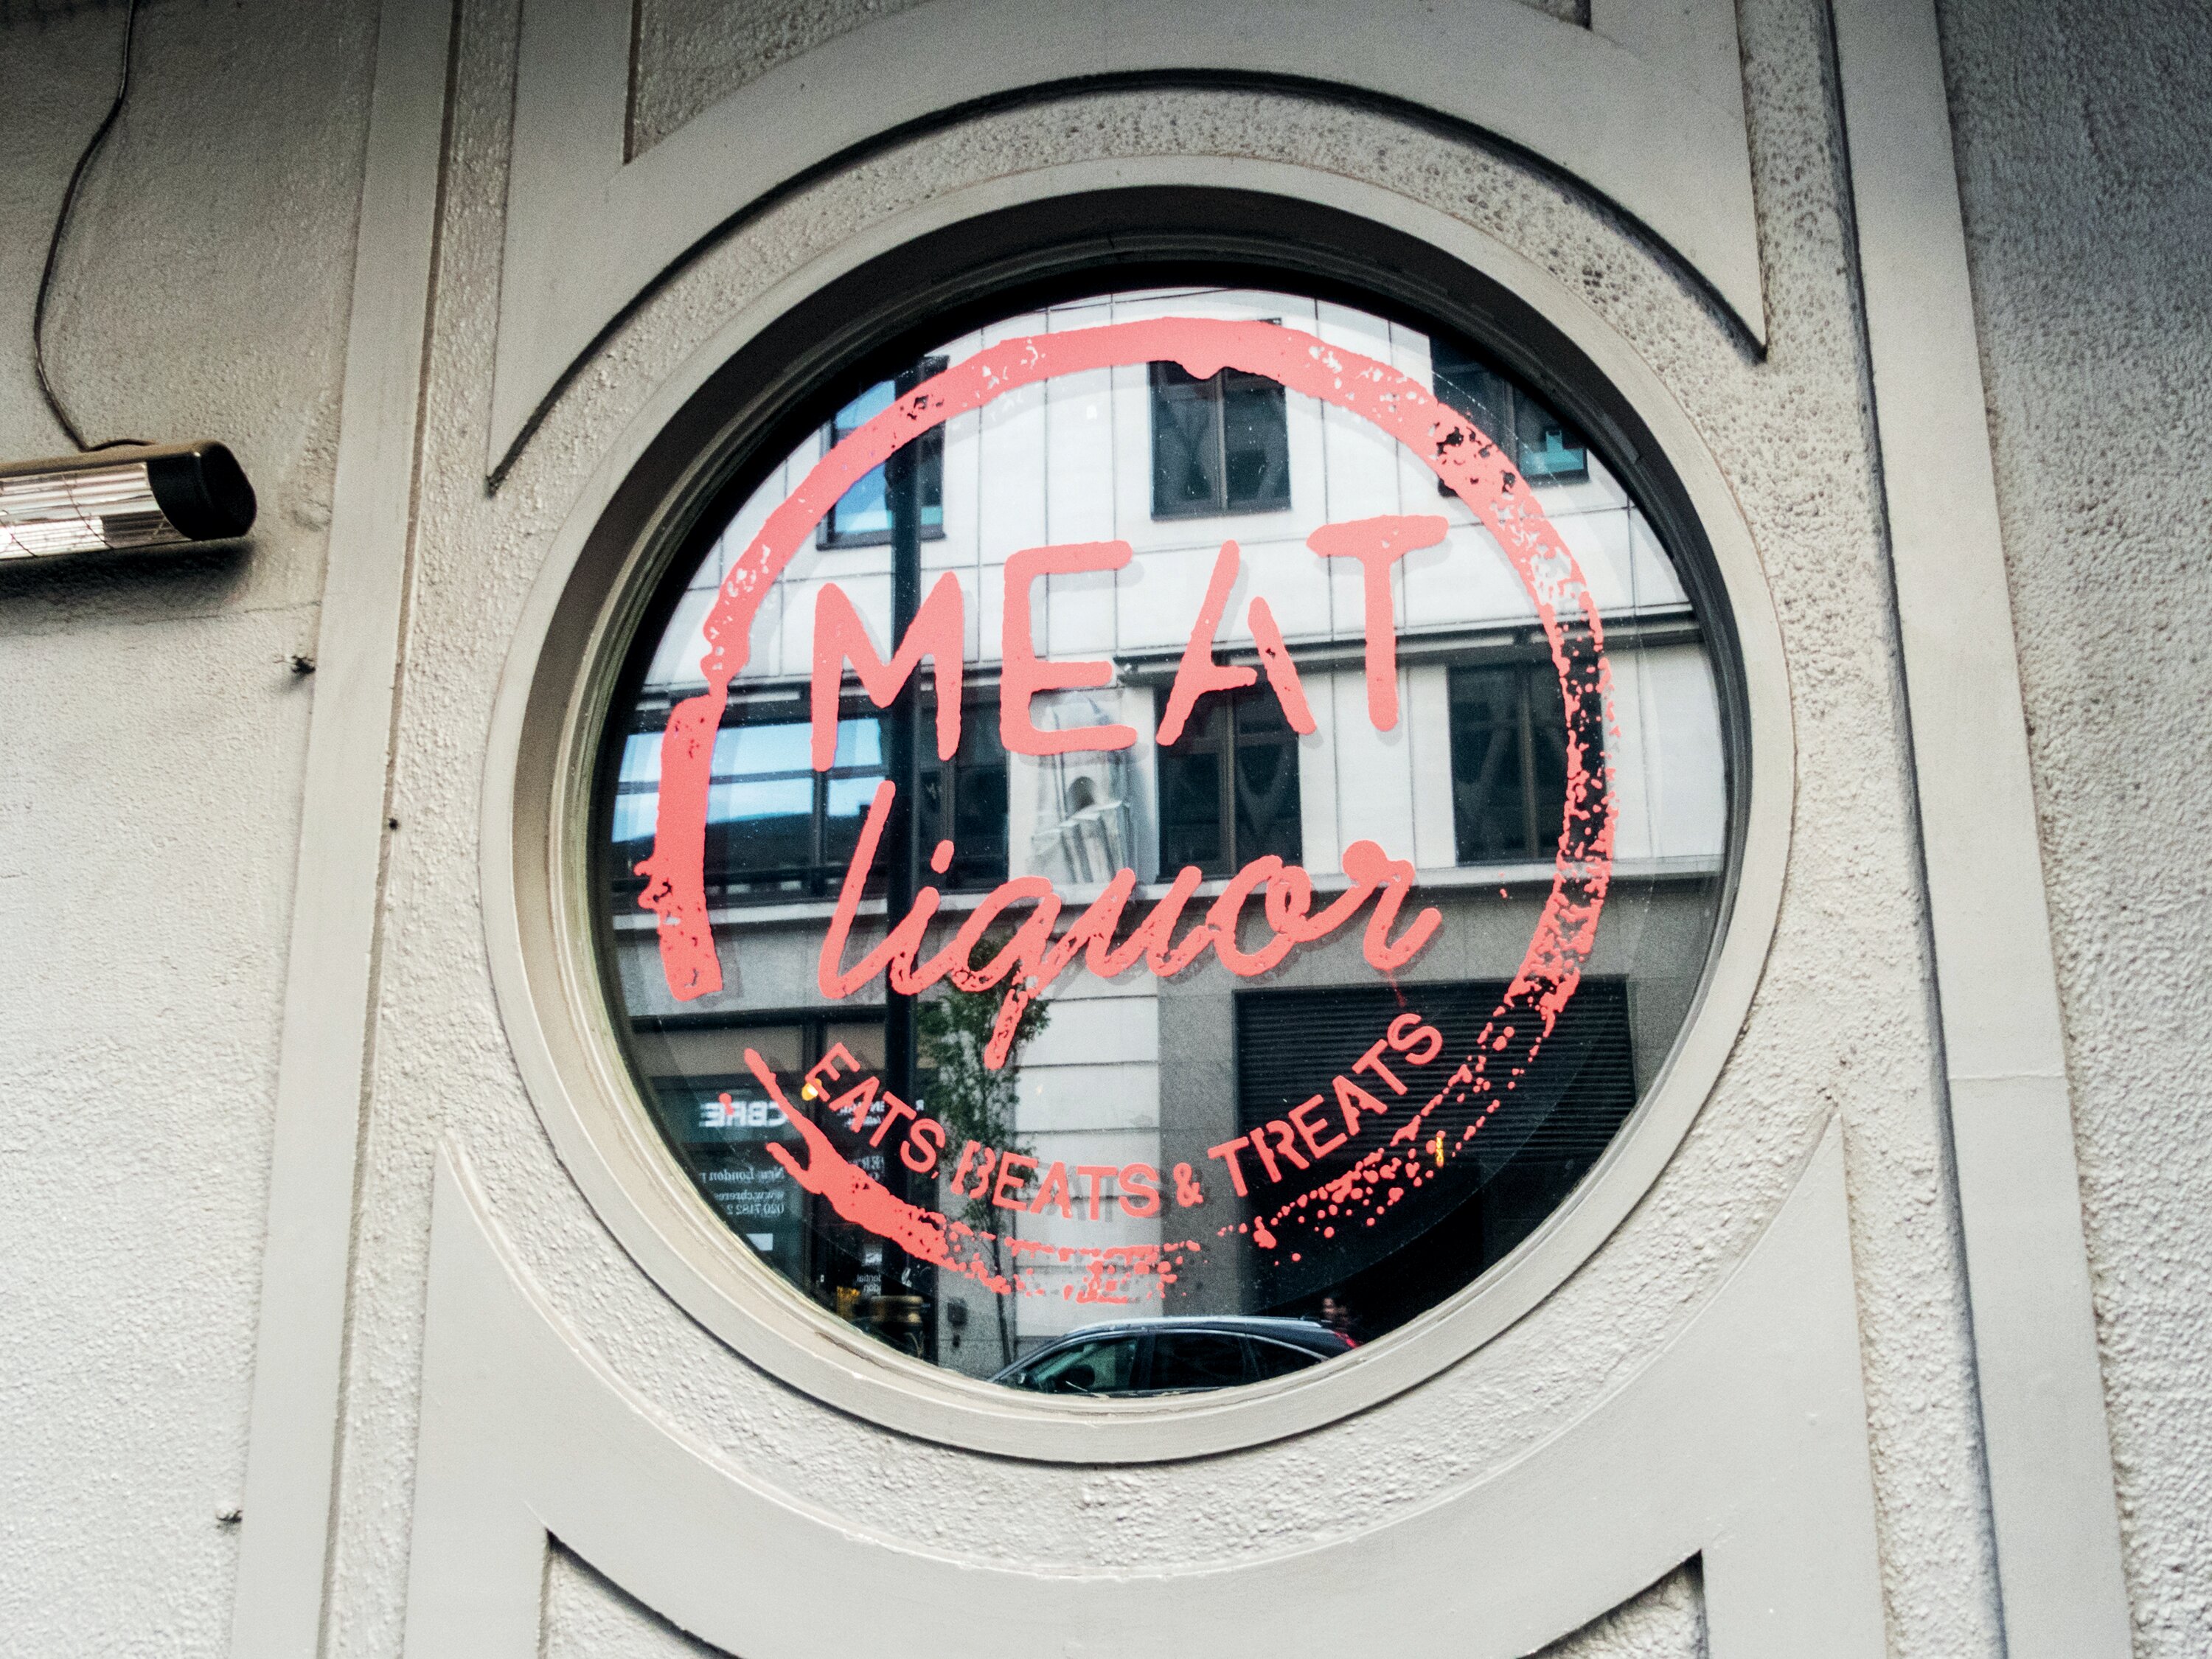 Meat Liquor to open restaurant in Clapham Old Town